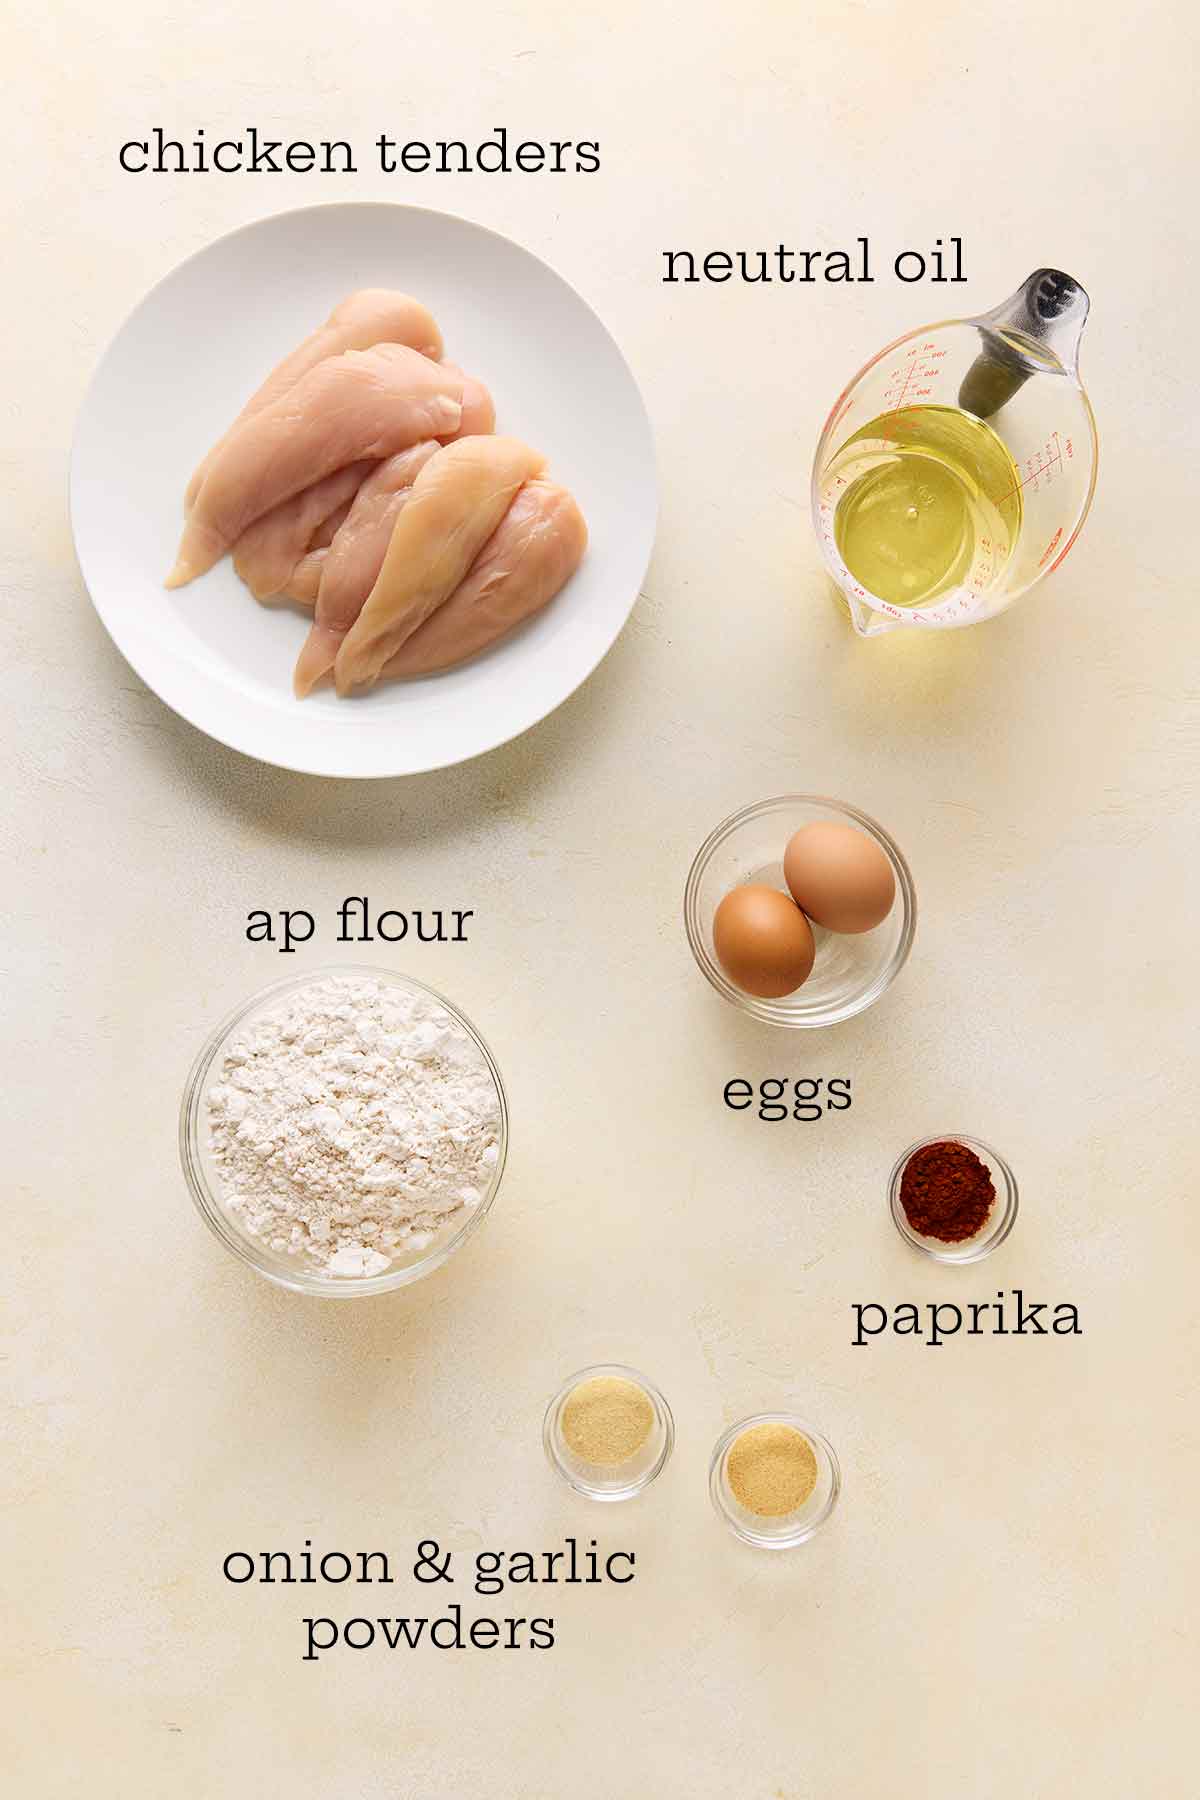 The ingredients for pan-fried chicken tenders: the tenders, oil, flour, eggs, paprika, onion and garlic powders.